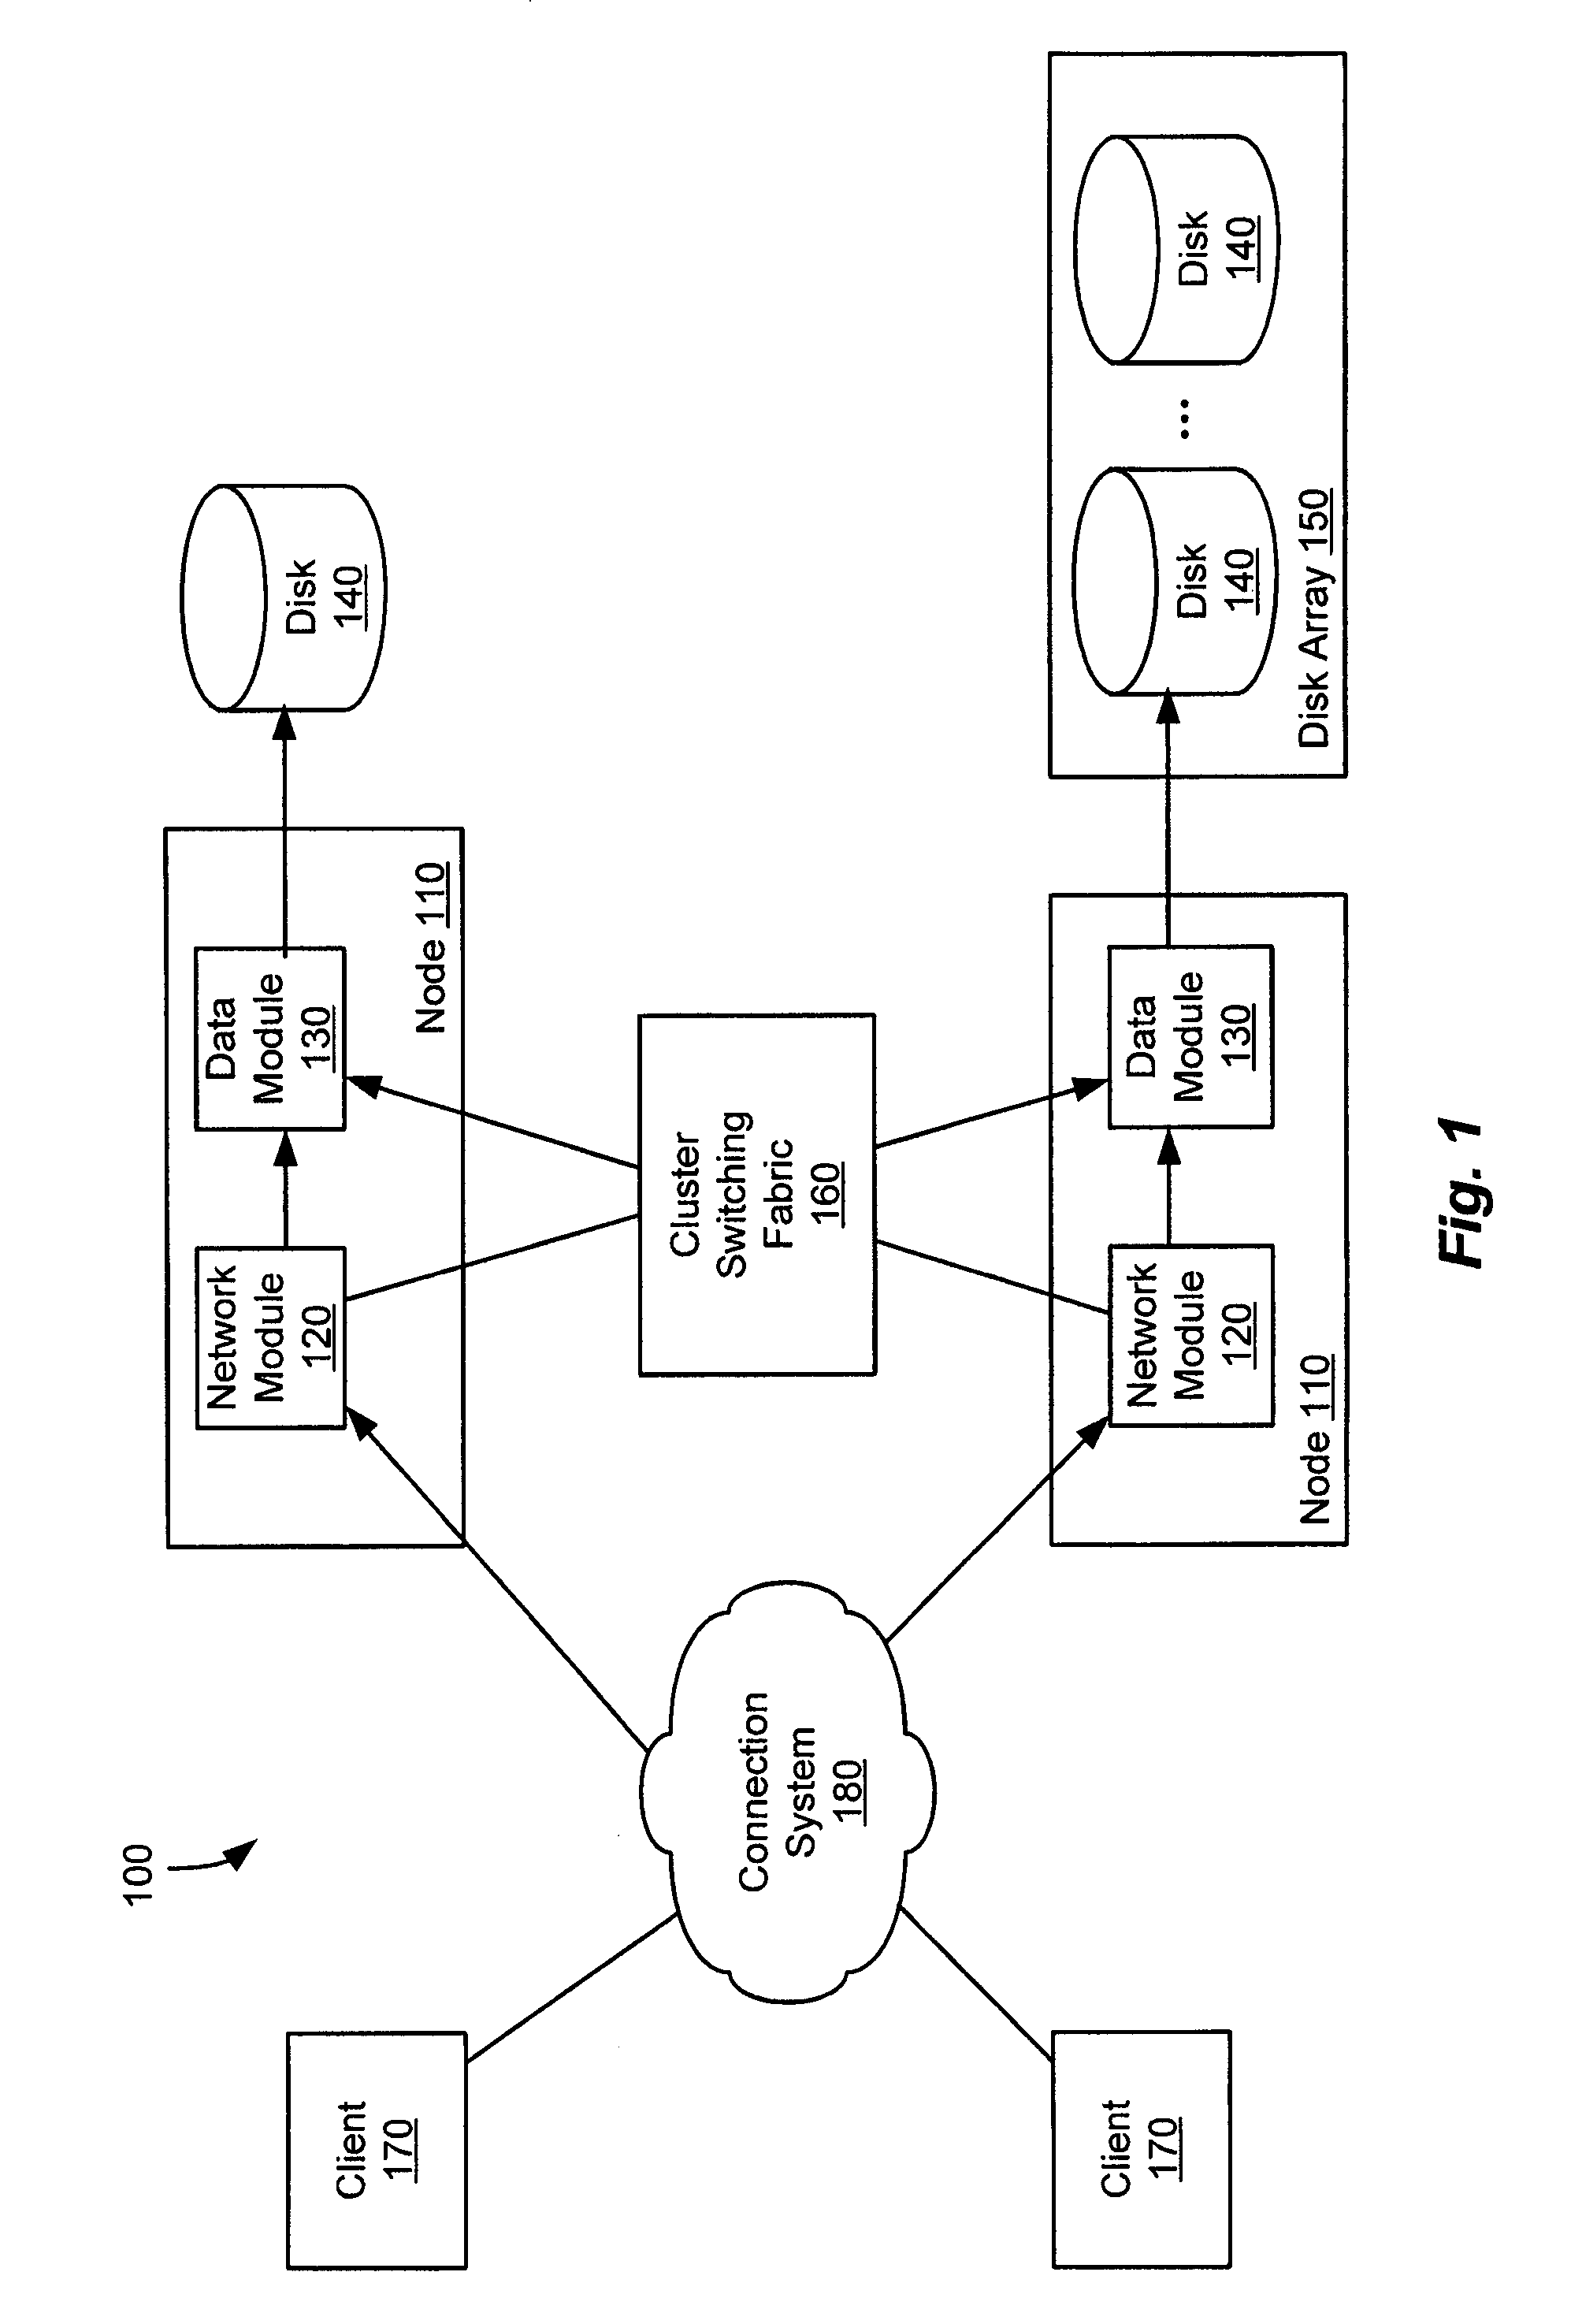 System and method for filtering information in a data storage system